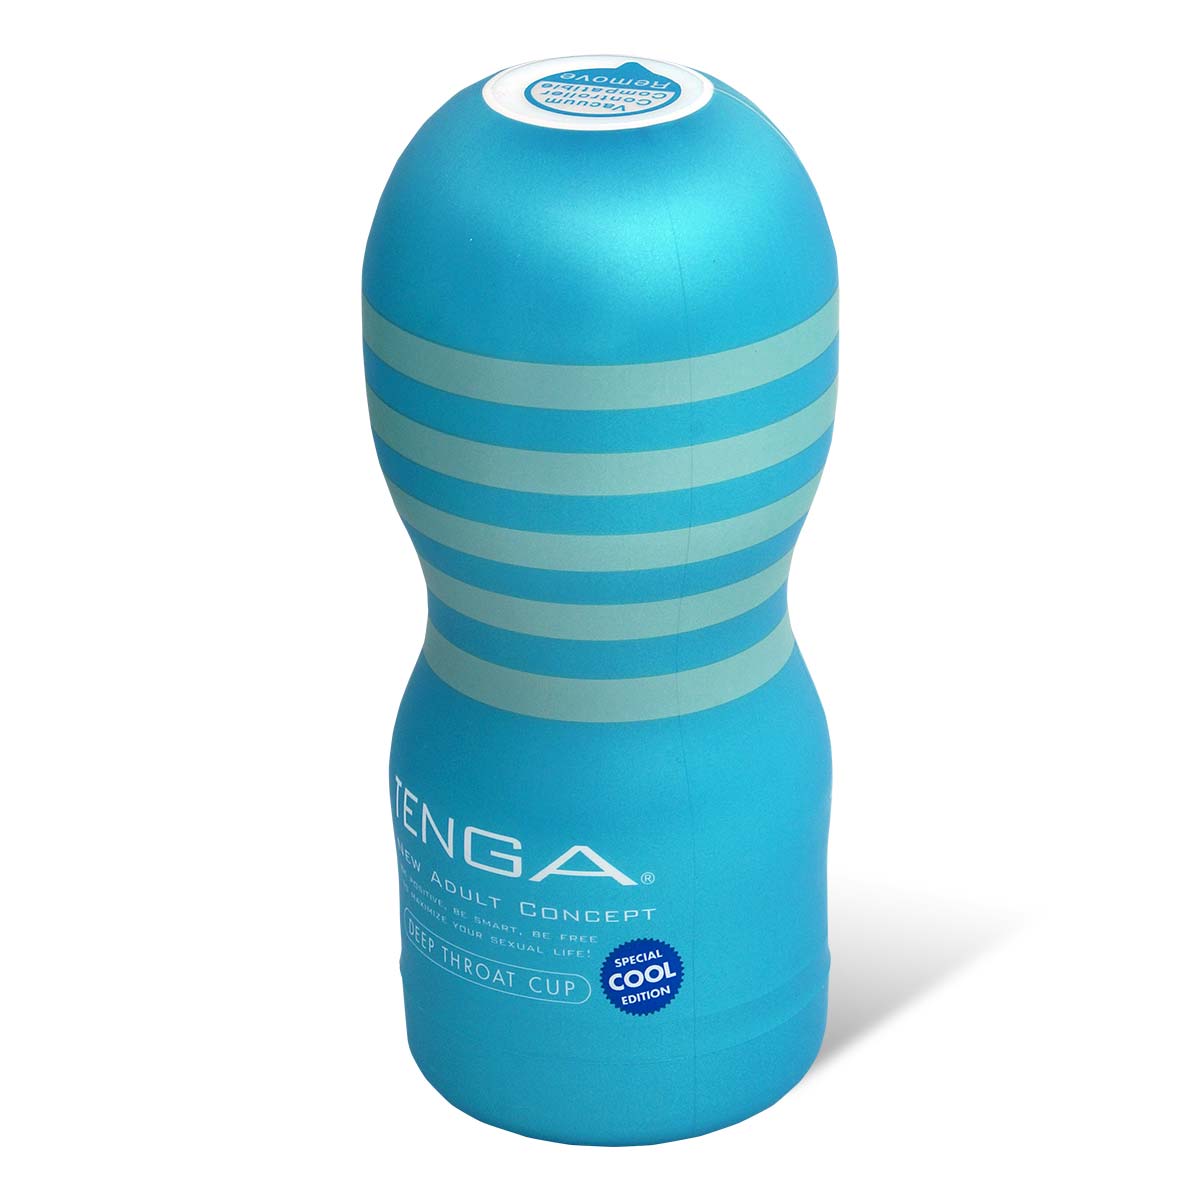 TENGA Deep Throat Cup SPECIAL COOL EDITION-thumb_1